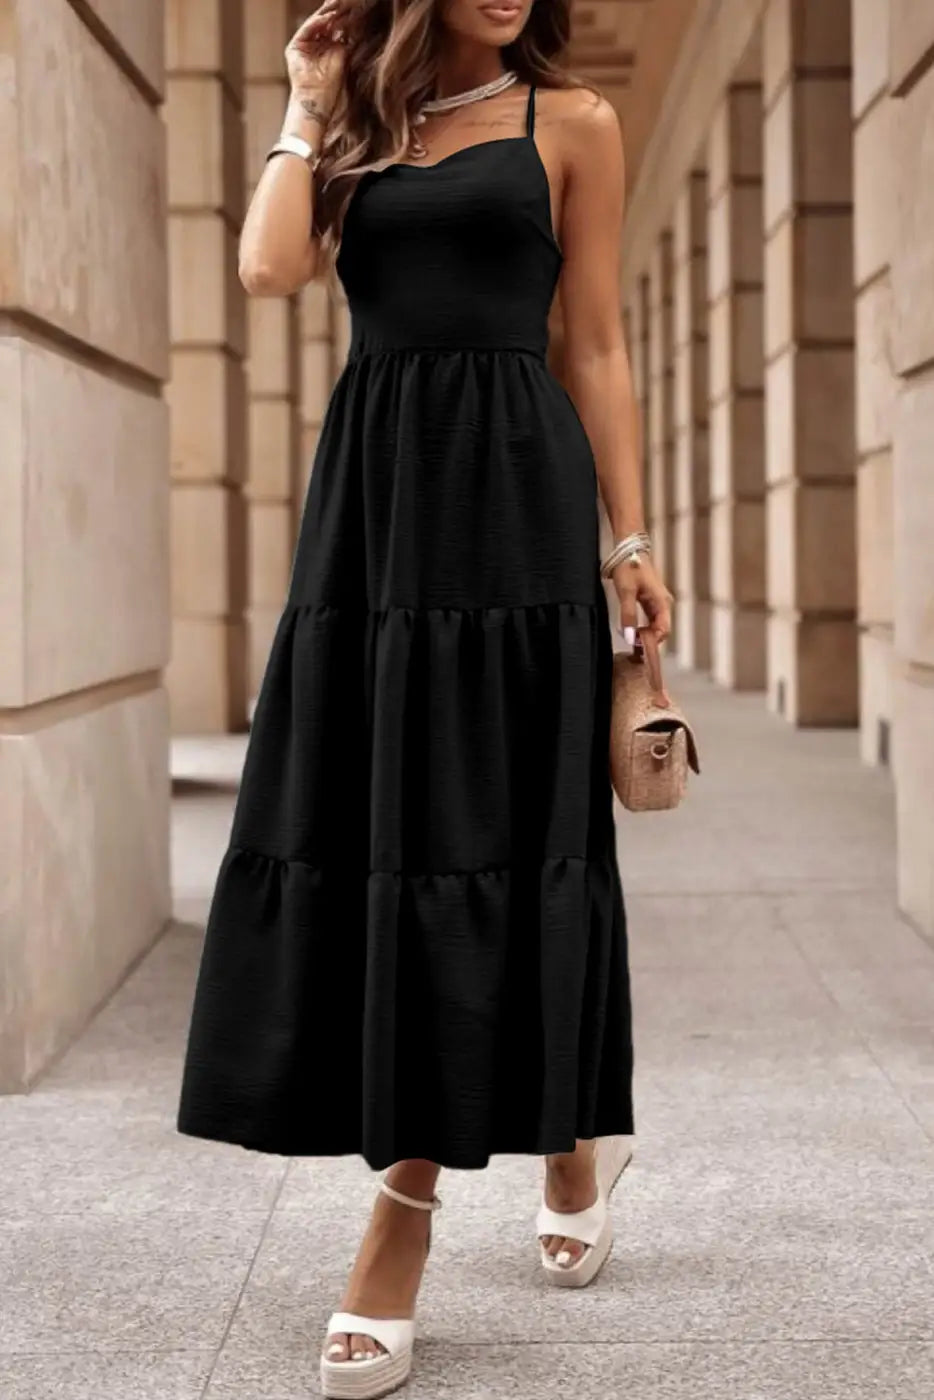 Black maxi dress - crossover backless bodice tiered - s / 100% polyester - dresses